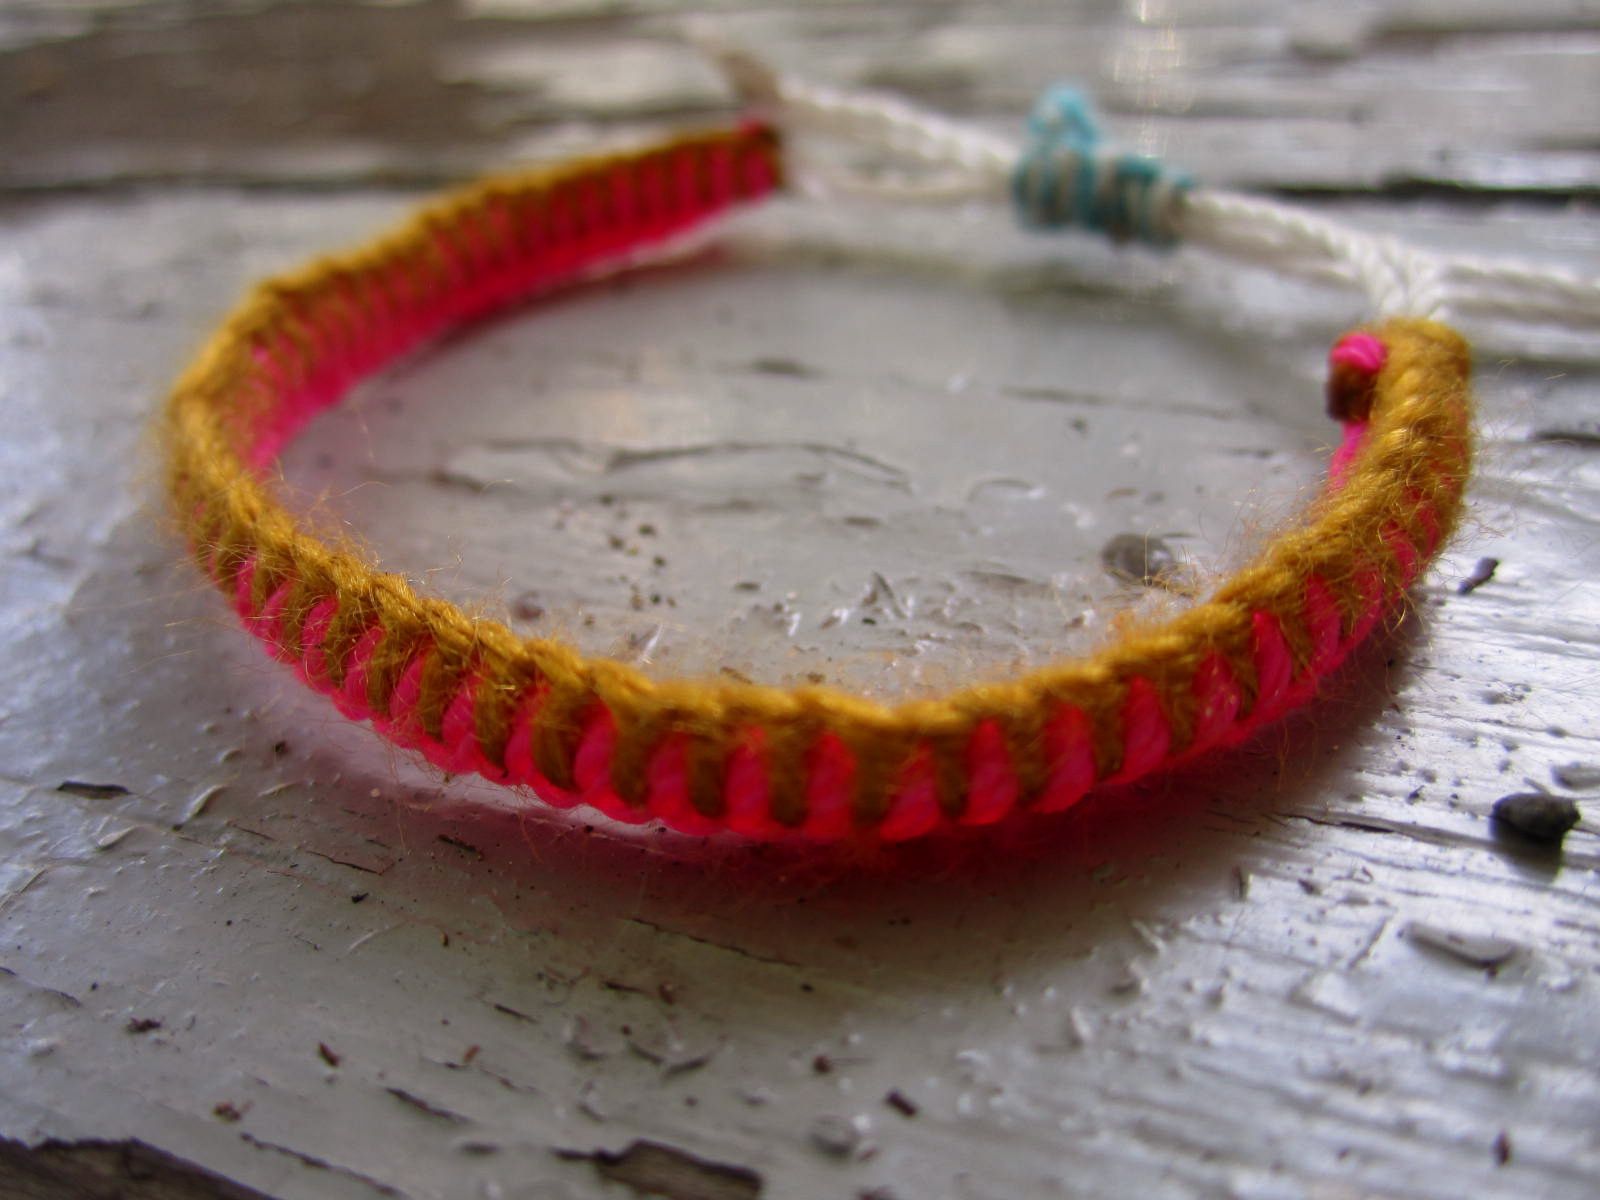 How to make a friendship bracelet with 3 pieces of string